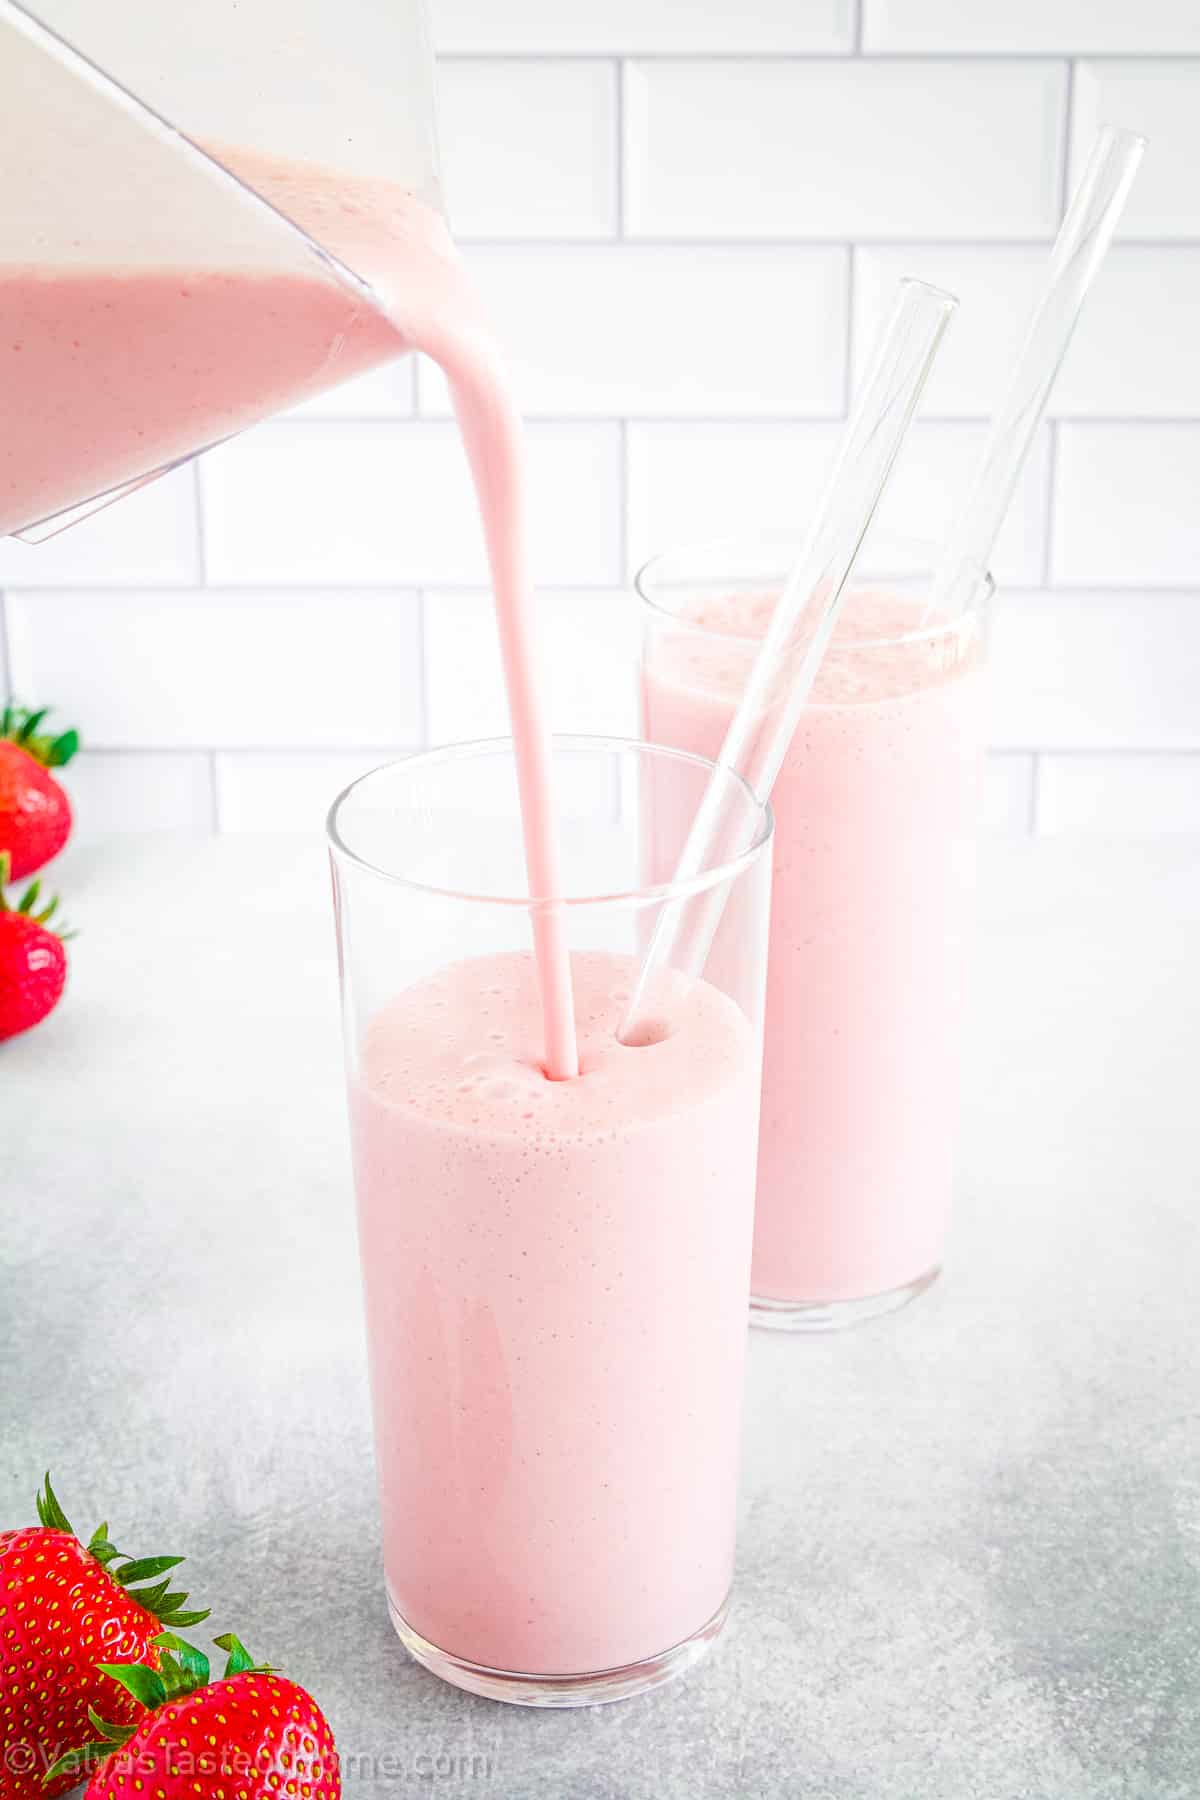 This smoothie recipe is the perfect blend of sweet and tangy flavors that will satisfy and energize you. It's quick and easy to make, and super delicious!